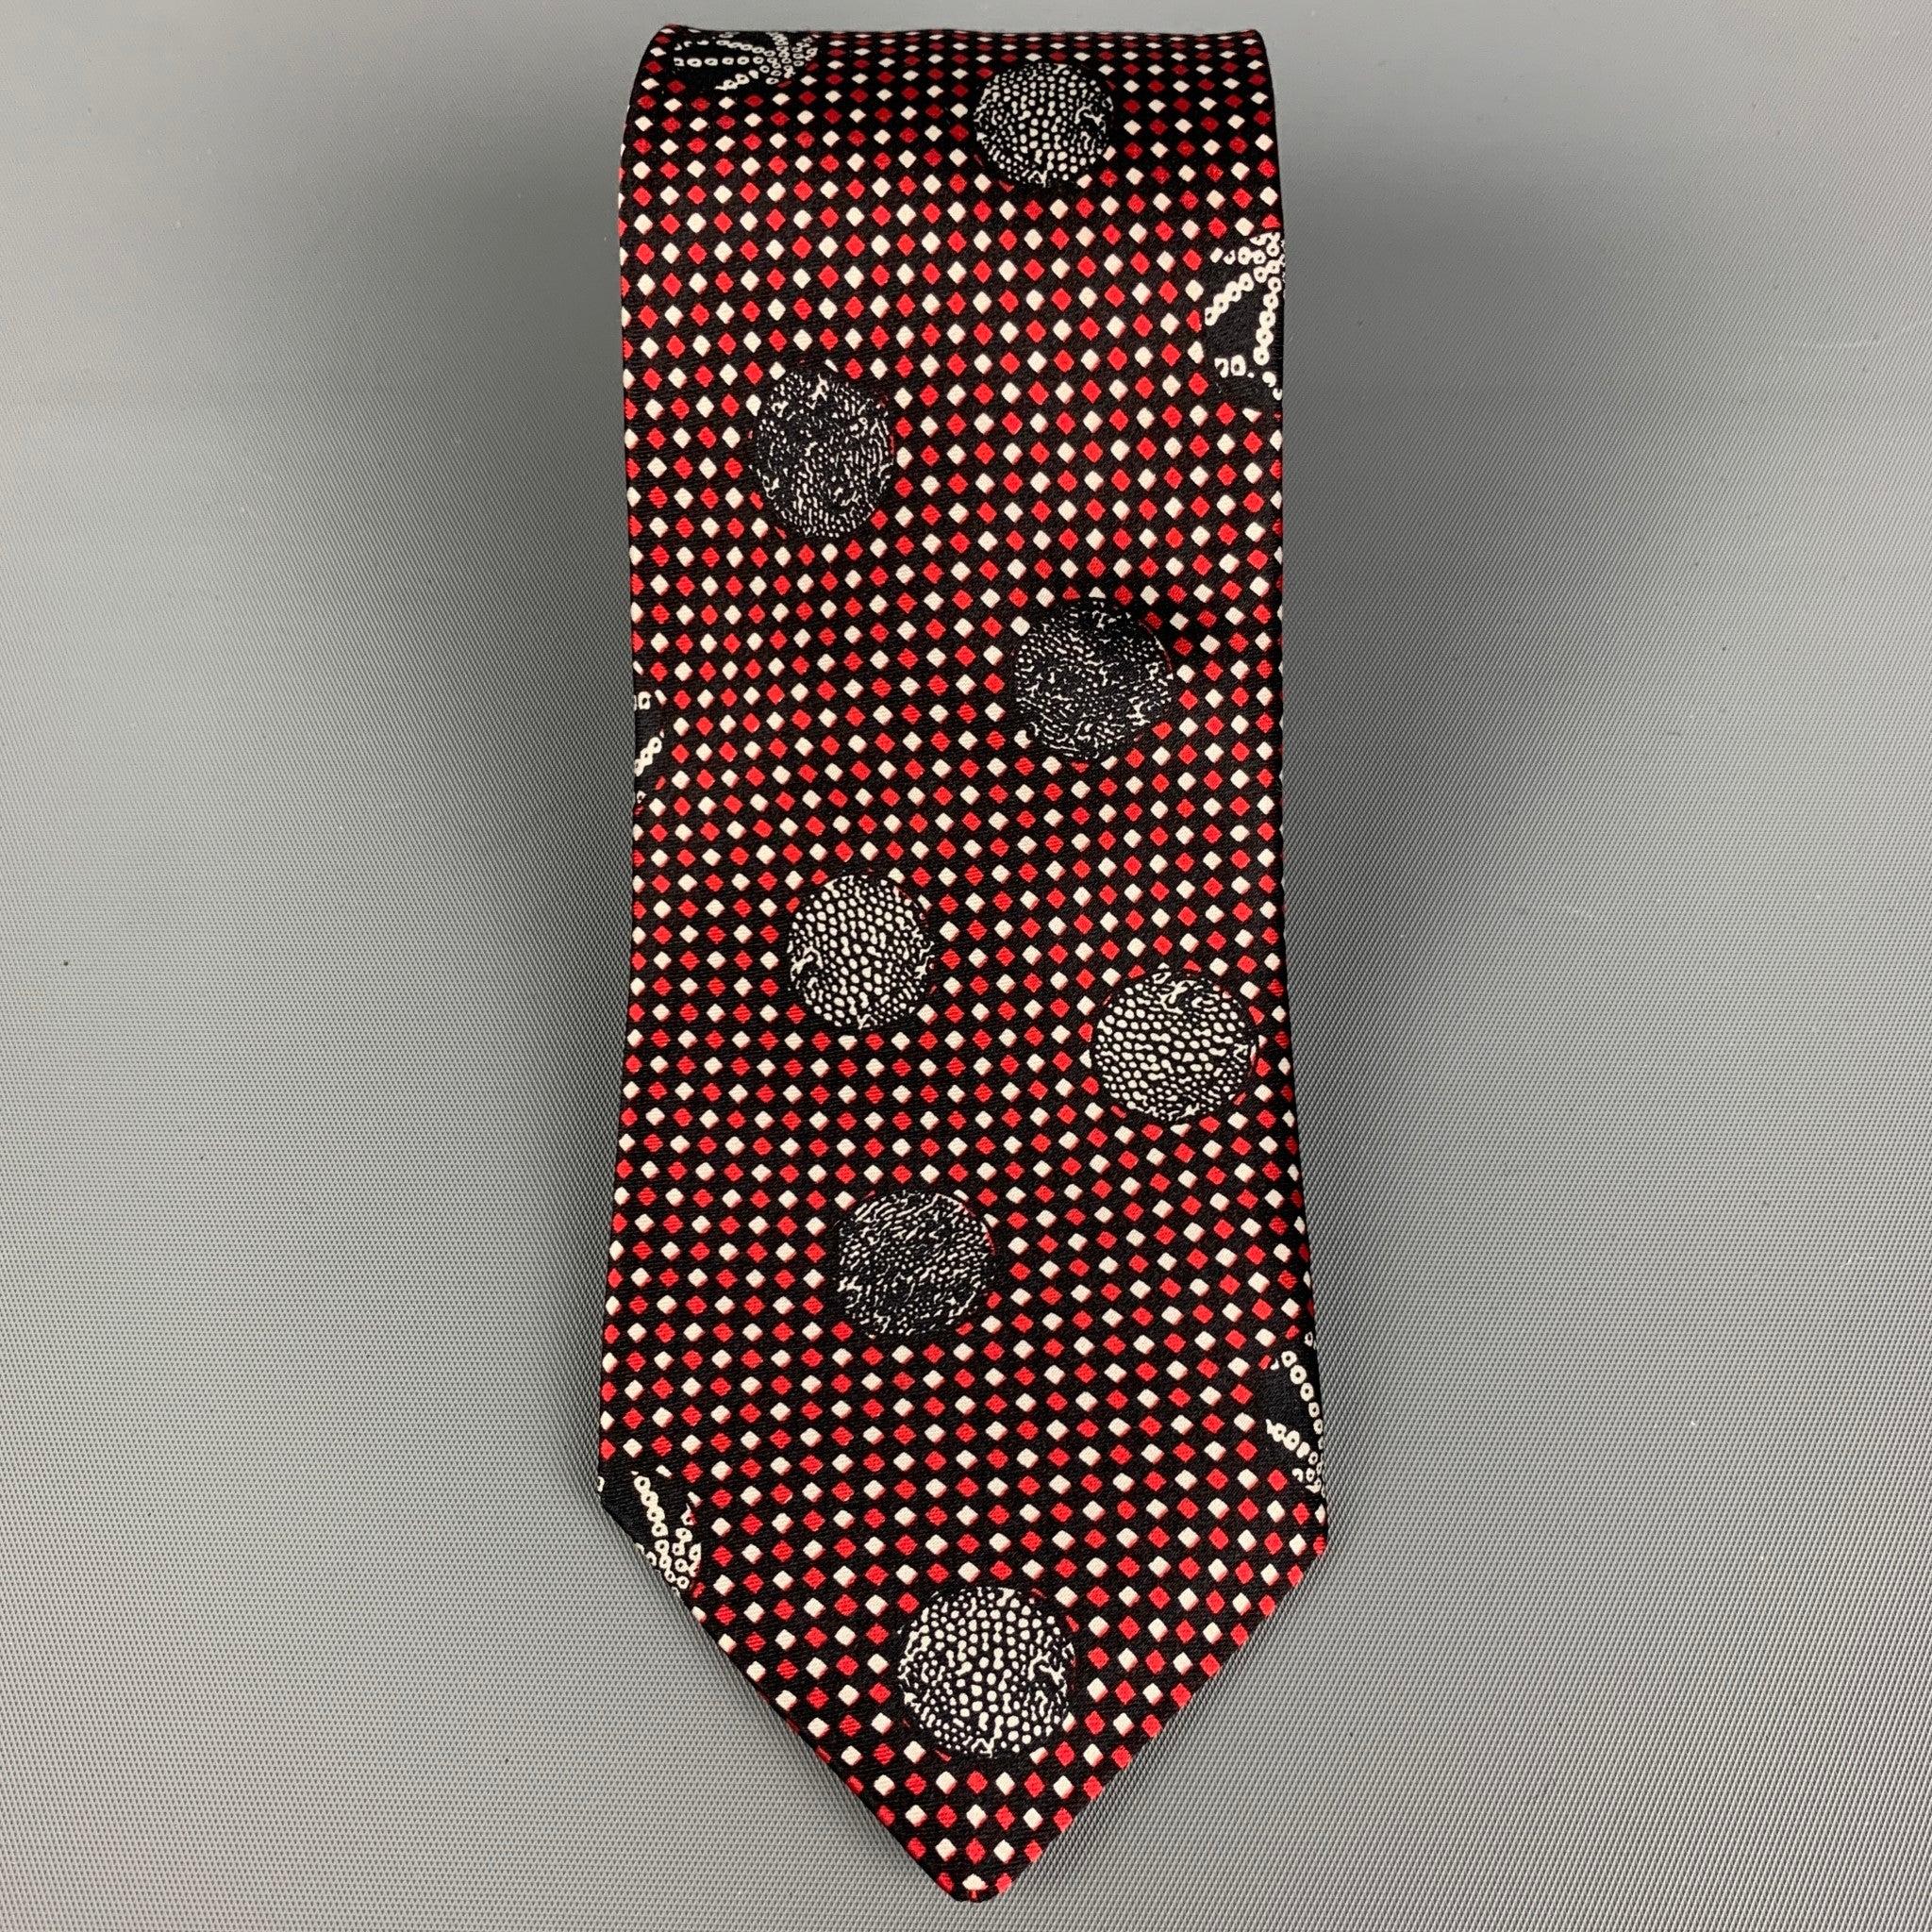 BOTTEGA VENETA
necktie comes in a black & red silk with a all over abstract print. Made in Italy. Very Good Pre-Owned Condition.Width: 2.75 inches 
  
  
 
Reference: 117444
Category: Tie
More Details
    
Brand:  BOTTEGA VENETA
Color:  Black
Color